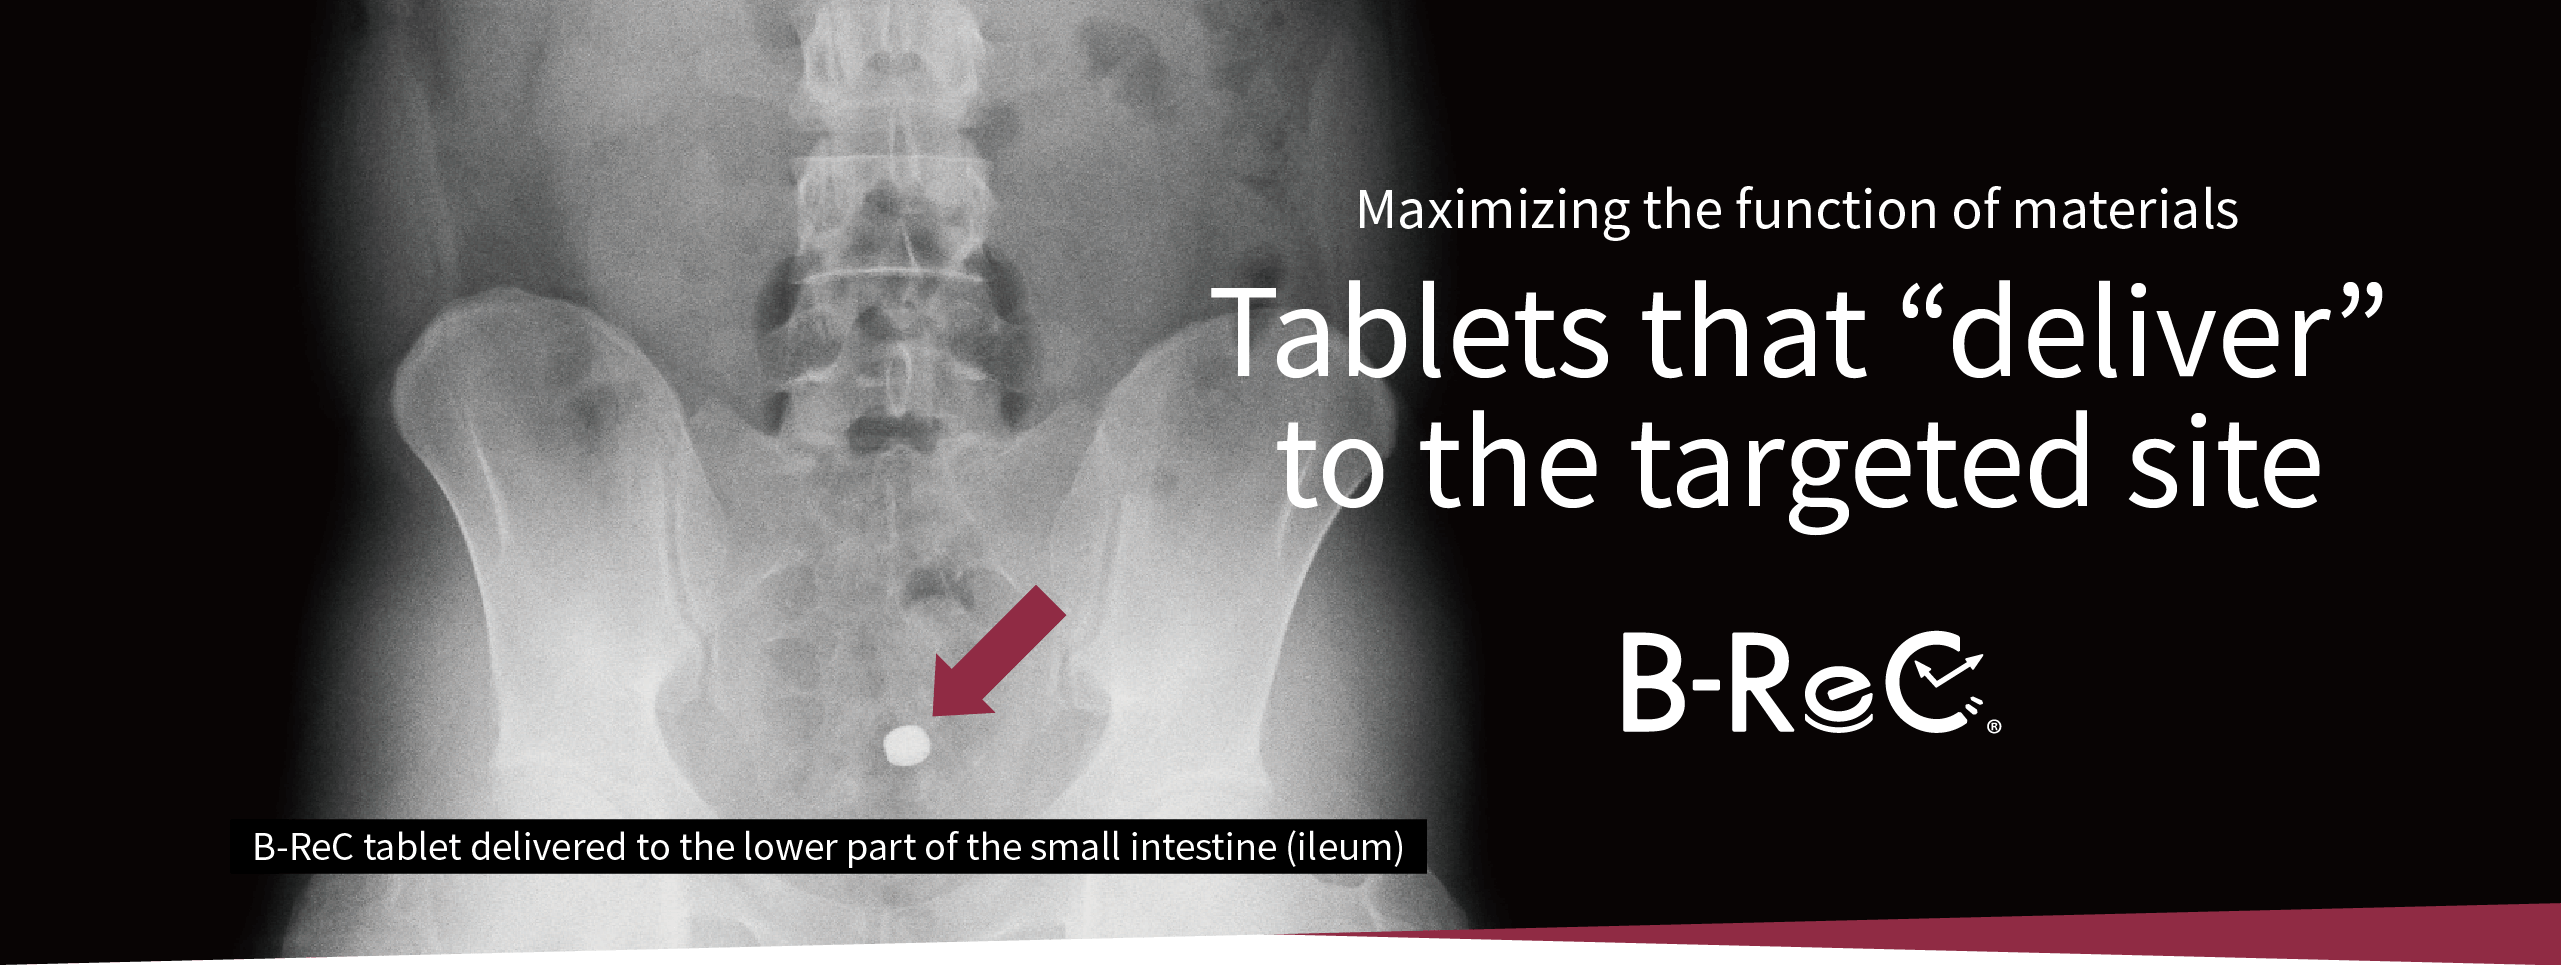 B-ReC tablet delivered to the lower part of the small intestine (ileum)/ Maximizing the function of materials Tablets that “deliver” to the targeted site B-ReC